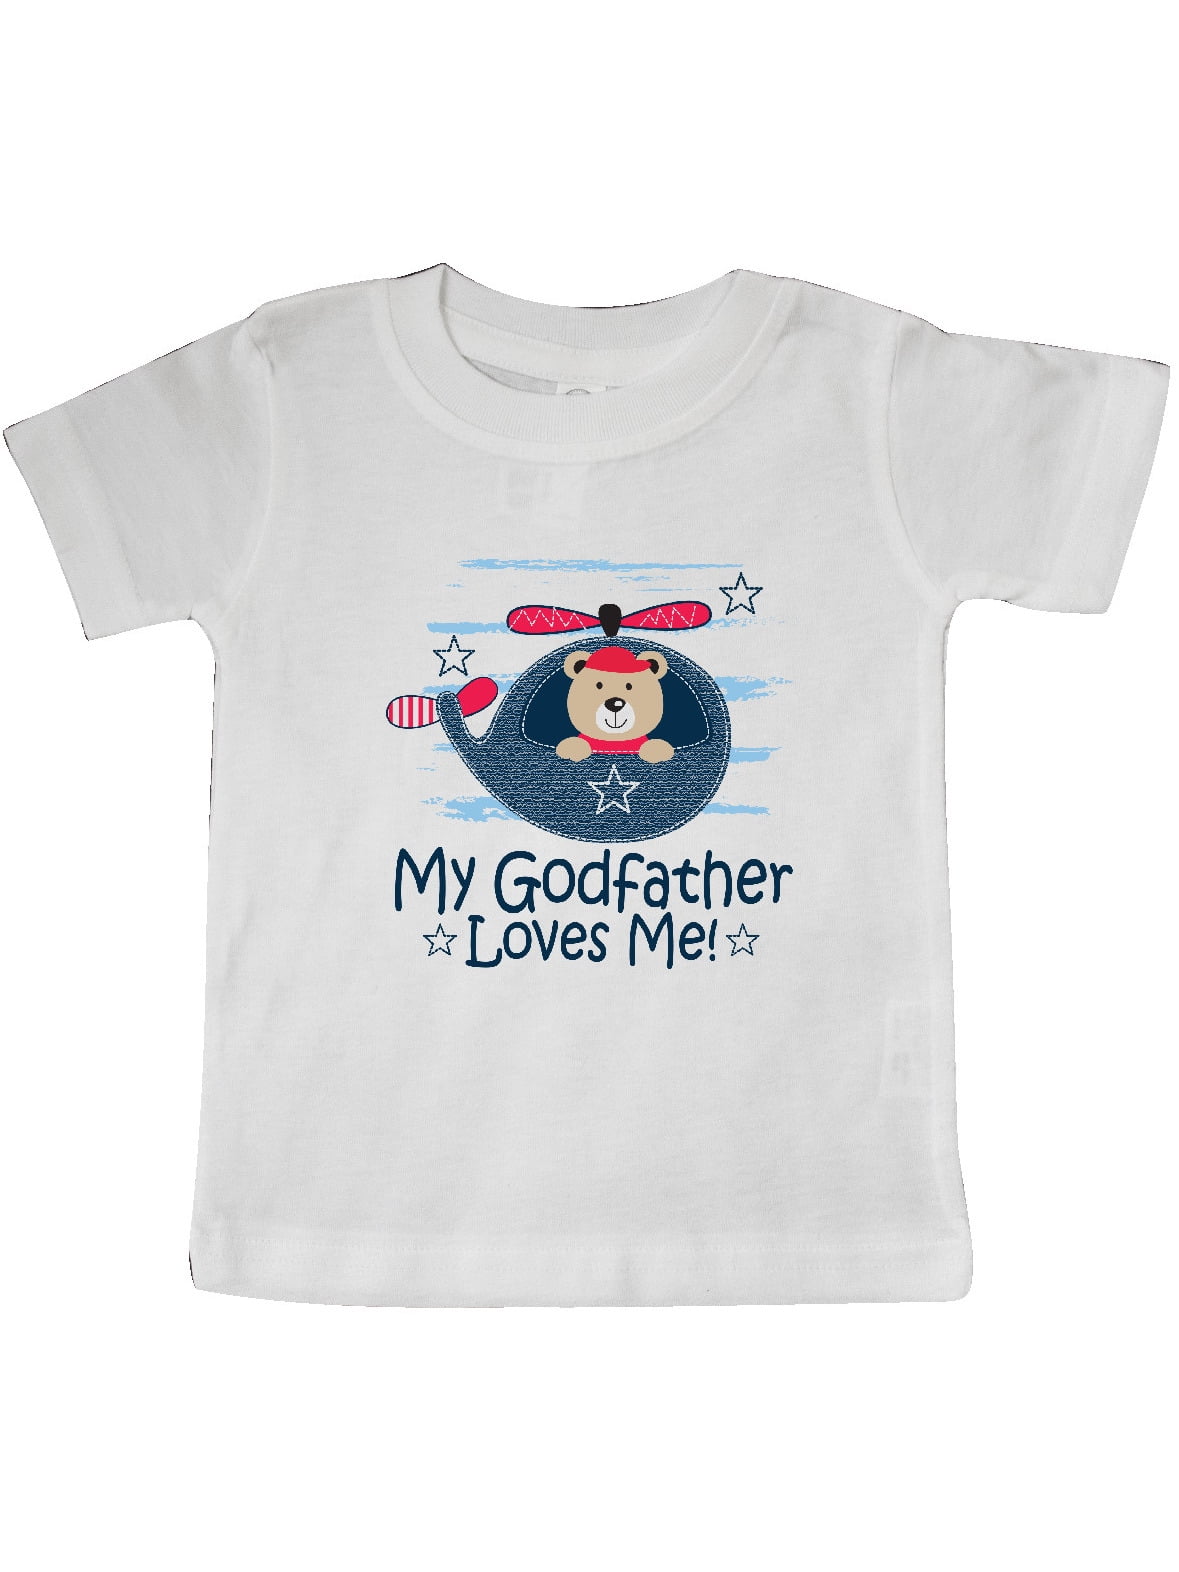 Toddler/Kids Long Sleeve T-Shirt My Godfather in California Loves Me 